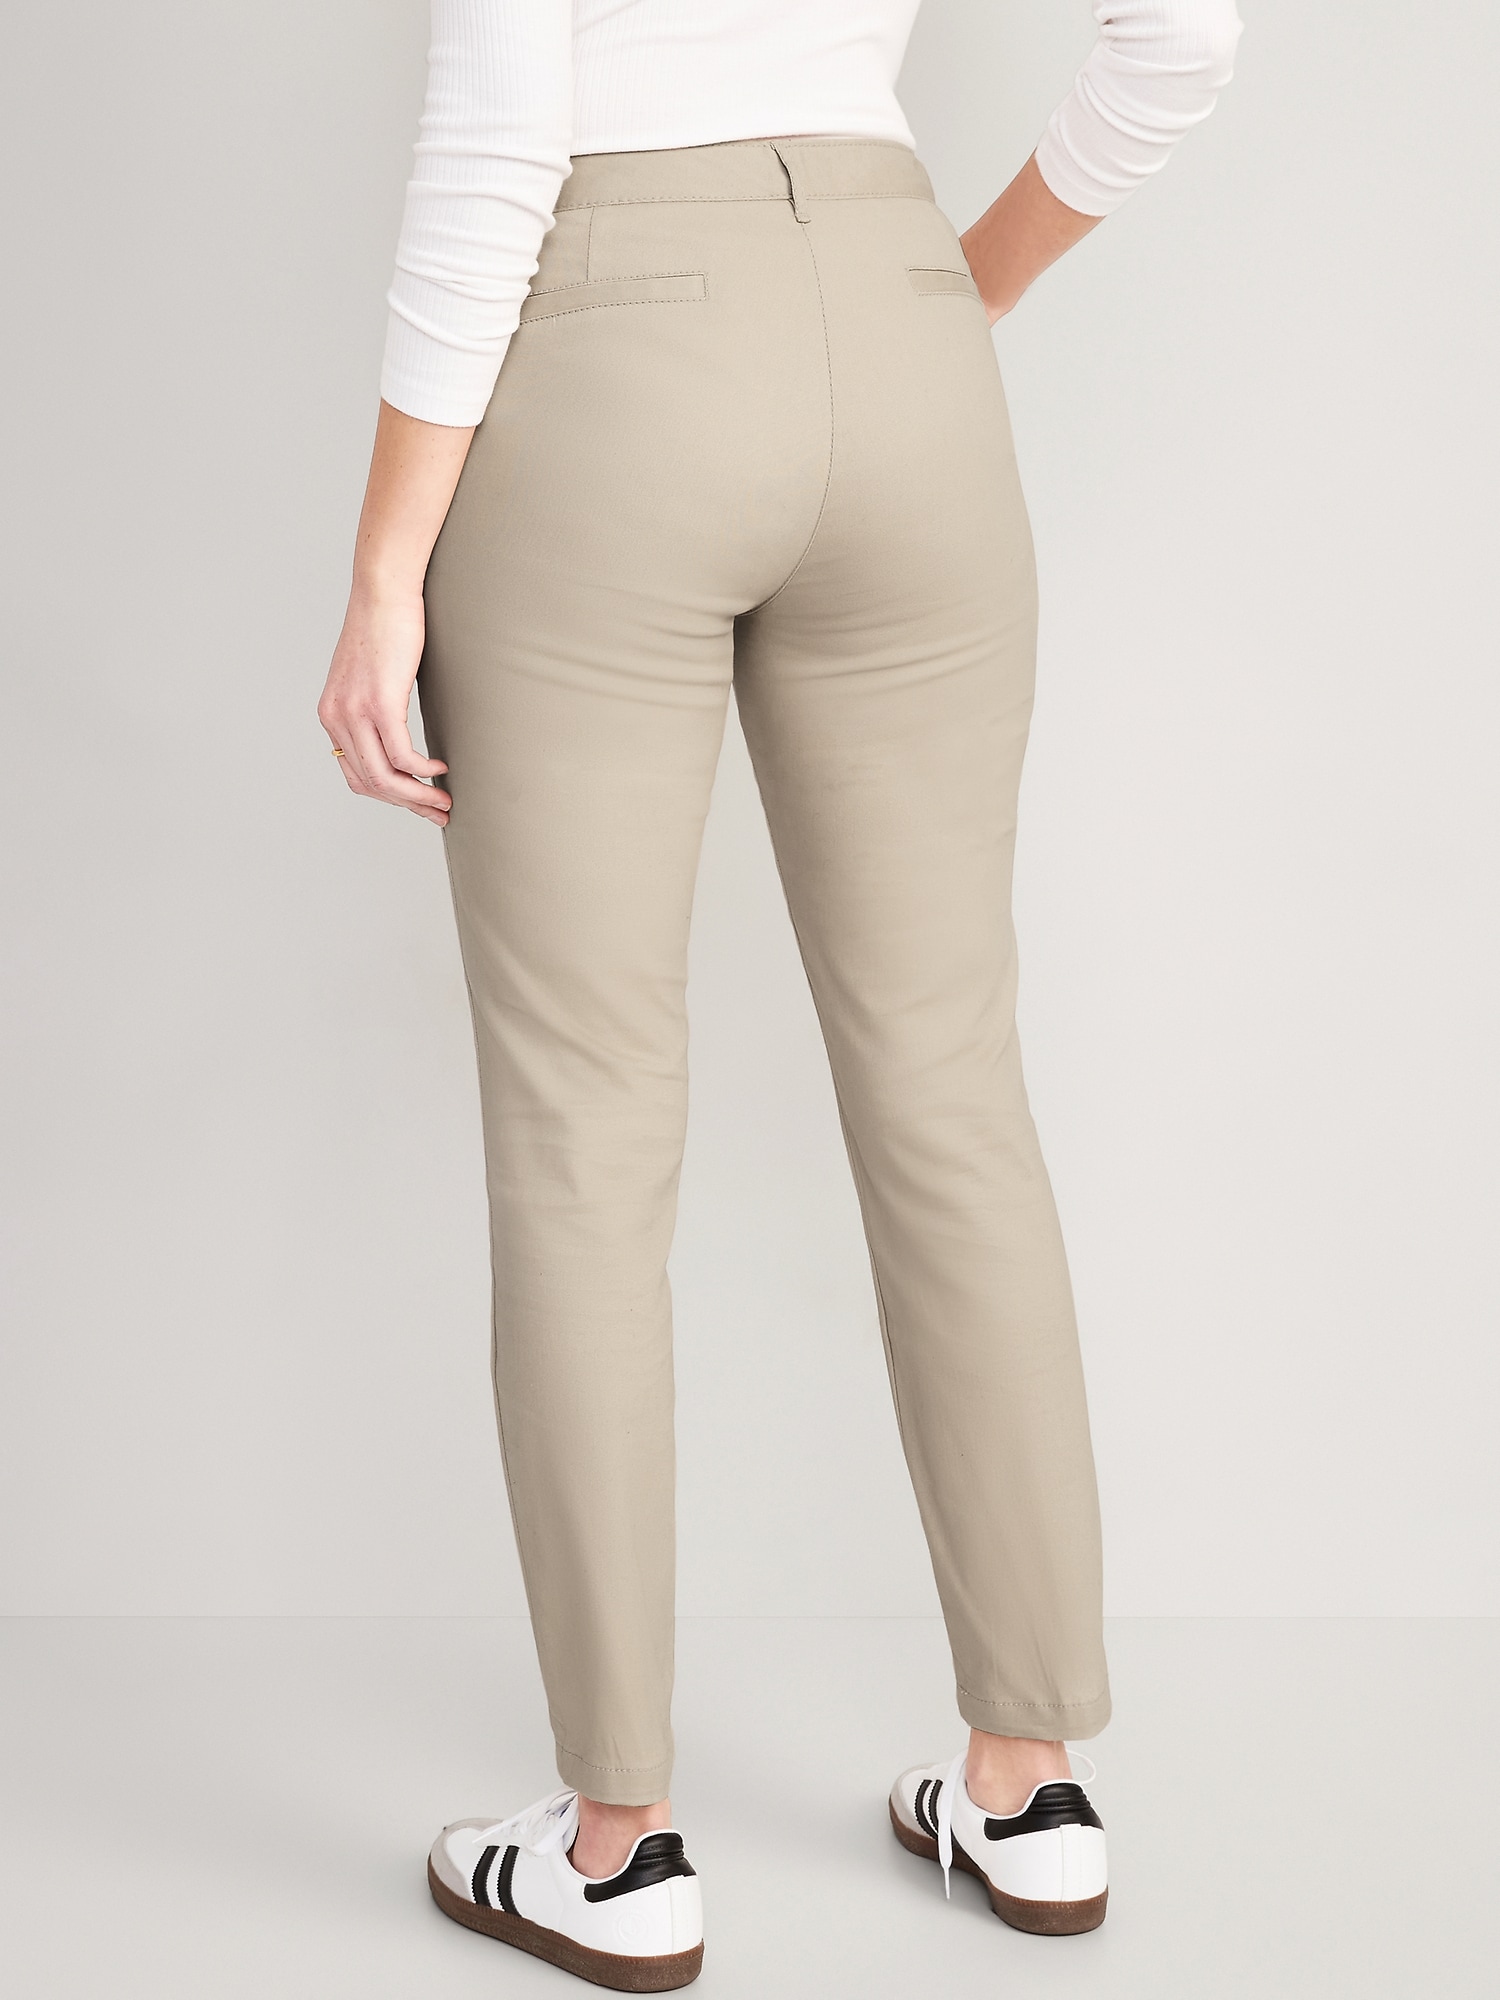 High Waisted Pants For Women